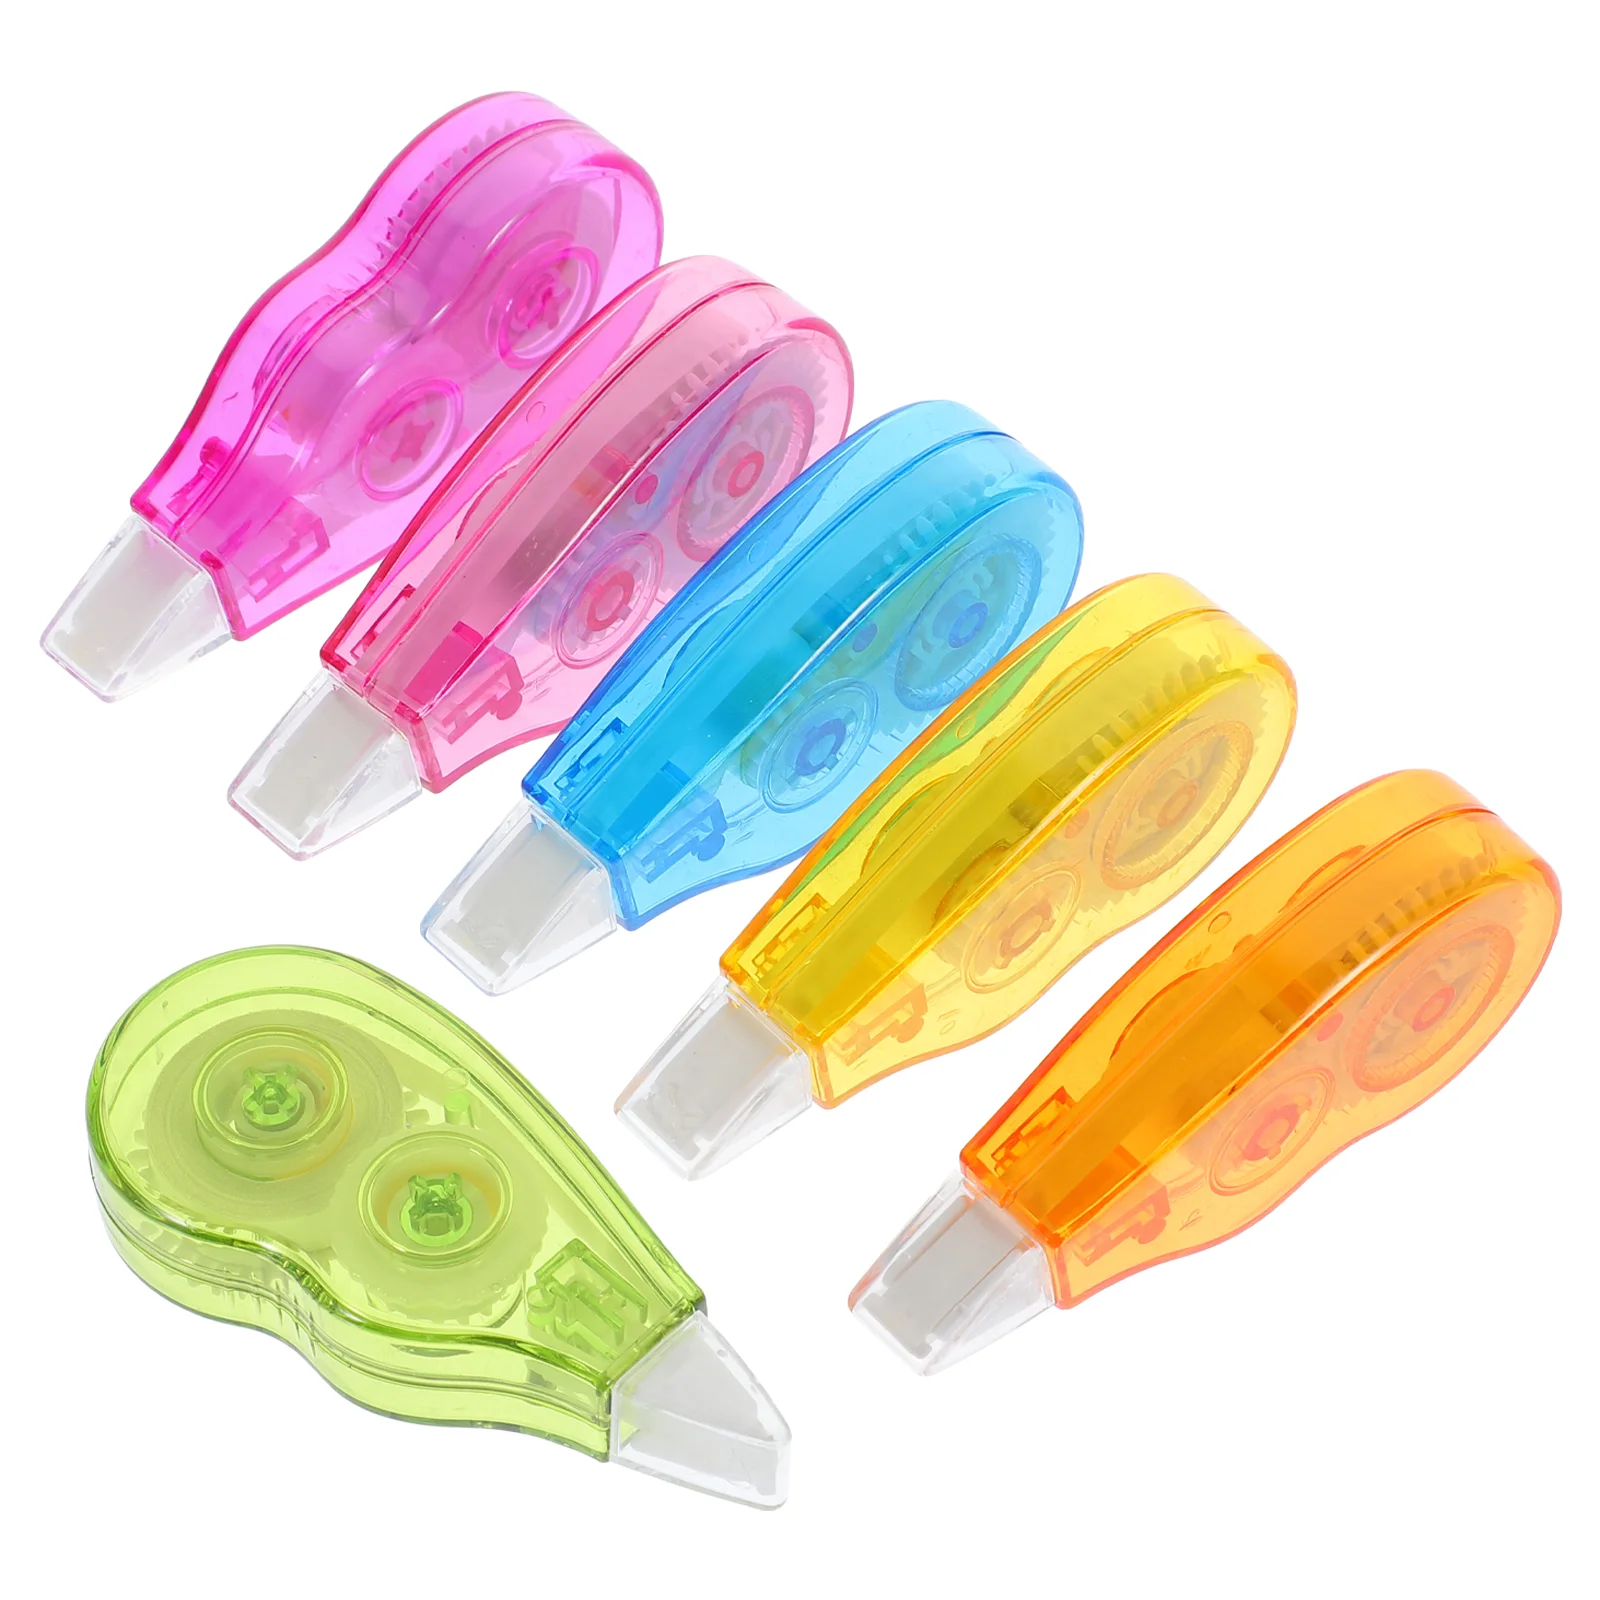 

6 Pcs Correction Tape Practical Writing White-out Tapes Adhesive Magnetic Portable Correcting Corrected Smooth